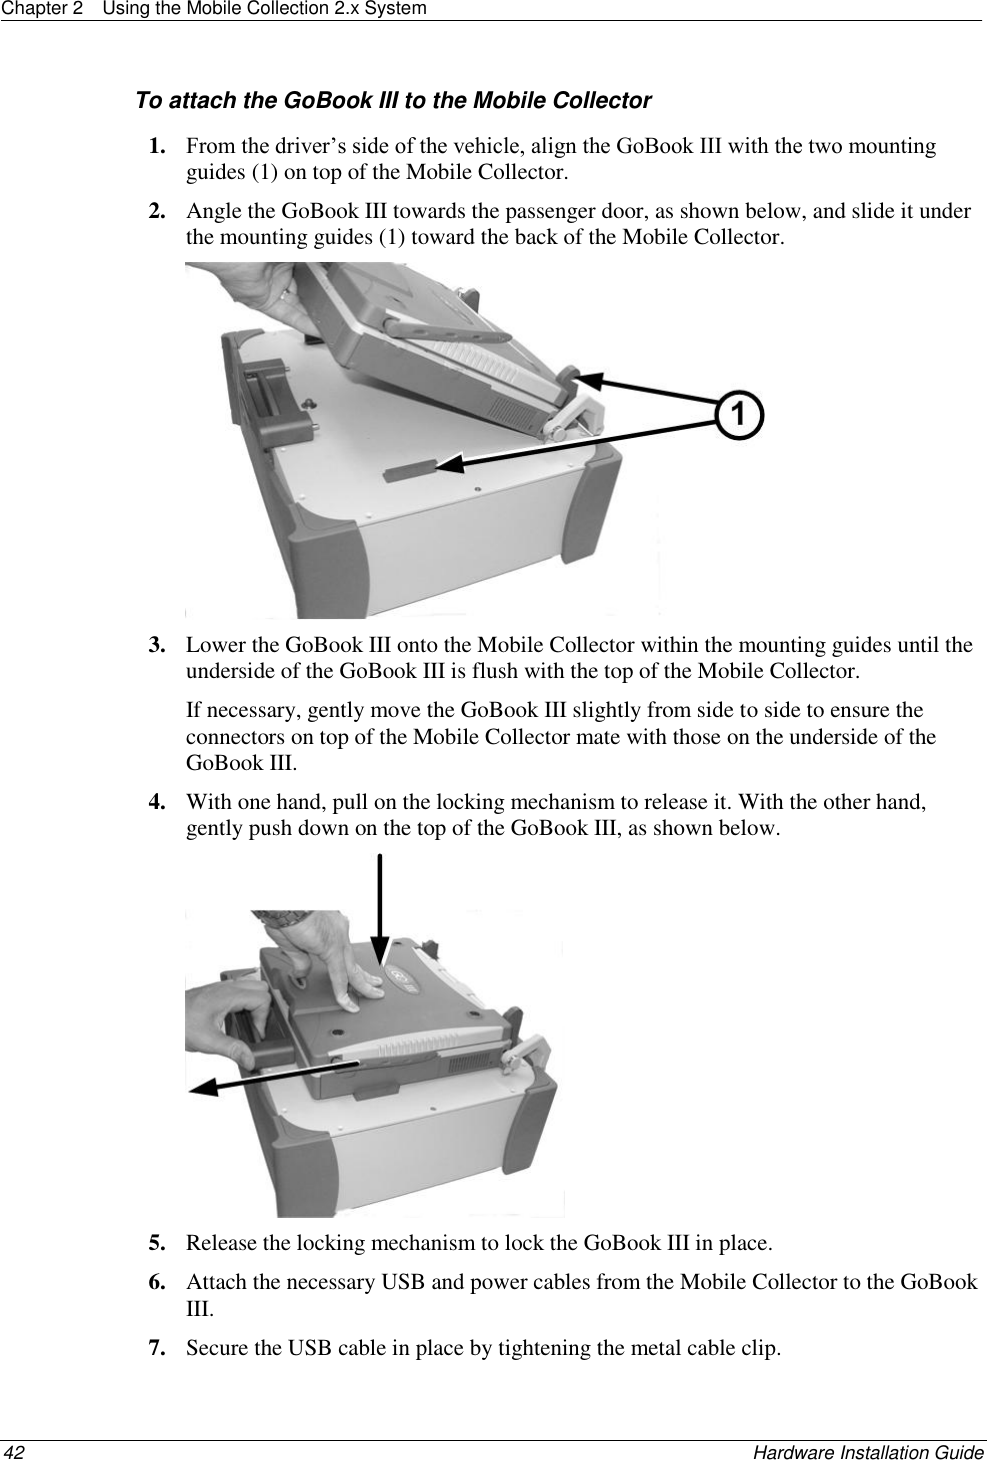 Chapter 2  Using the Mobile Collection 2.x System  42    Hardware Installation Guide  To attach the GoBook III to the Mobile Collector 1. From the driver’s side of the vehicle, align the GoBook III with the two mounting guides (1) on top of the Mobile Collector.  2. Angle the GoBook III towards the passenger door, as shown below, and slide it under the mounting guides (1) toward the back of the Mobile Collector.  3. Lower the GoBook III onto the Mobile Collector within the mounting guides until the underside of the GoBook III is flush with the top of the Mobile Collector.  If necessary, gently move the GoBook III slightly from side to side to ensure the connectors on top of the Mobile Collector mate with those on the underside of the GoBook III. 4. With one hand, pull on the locking mechanism to release it. With the other hand, gently push down on the top of the GoBook III, as shown below.   5. Release the locking mechanism to lock the GoBook III in place. 6. Attach the necessary USB and power cables from the Mobile Collector to the GoBook III.  7. Secure the USB cable in place by tightening the metal cable clip. 